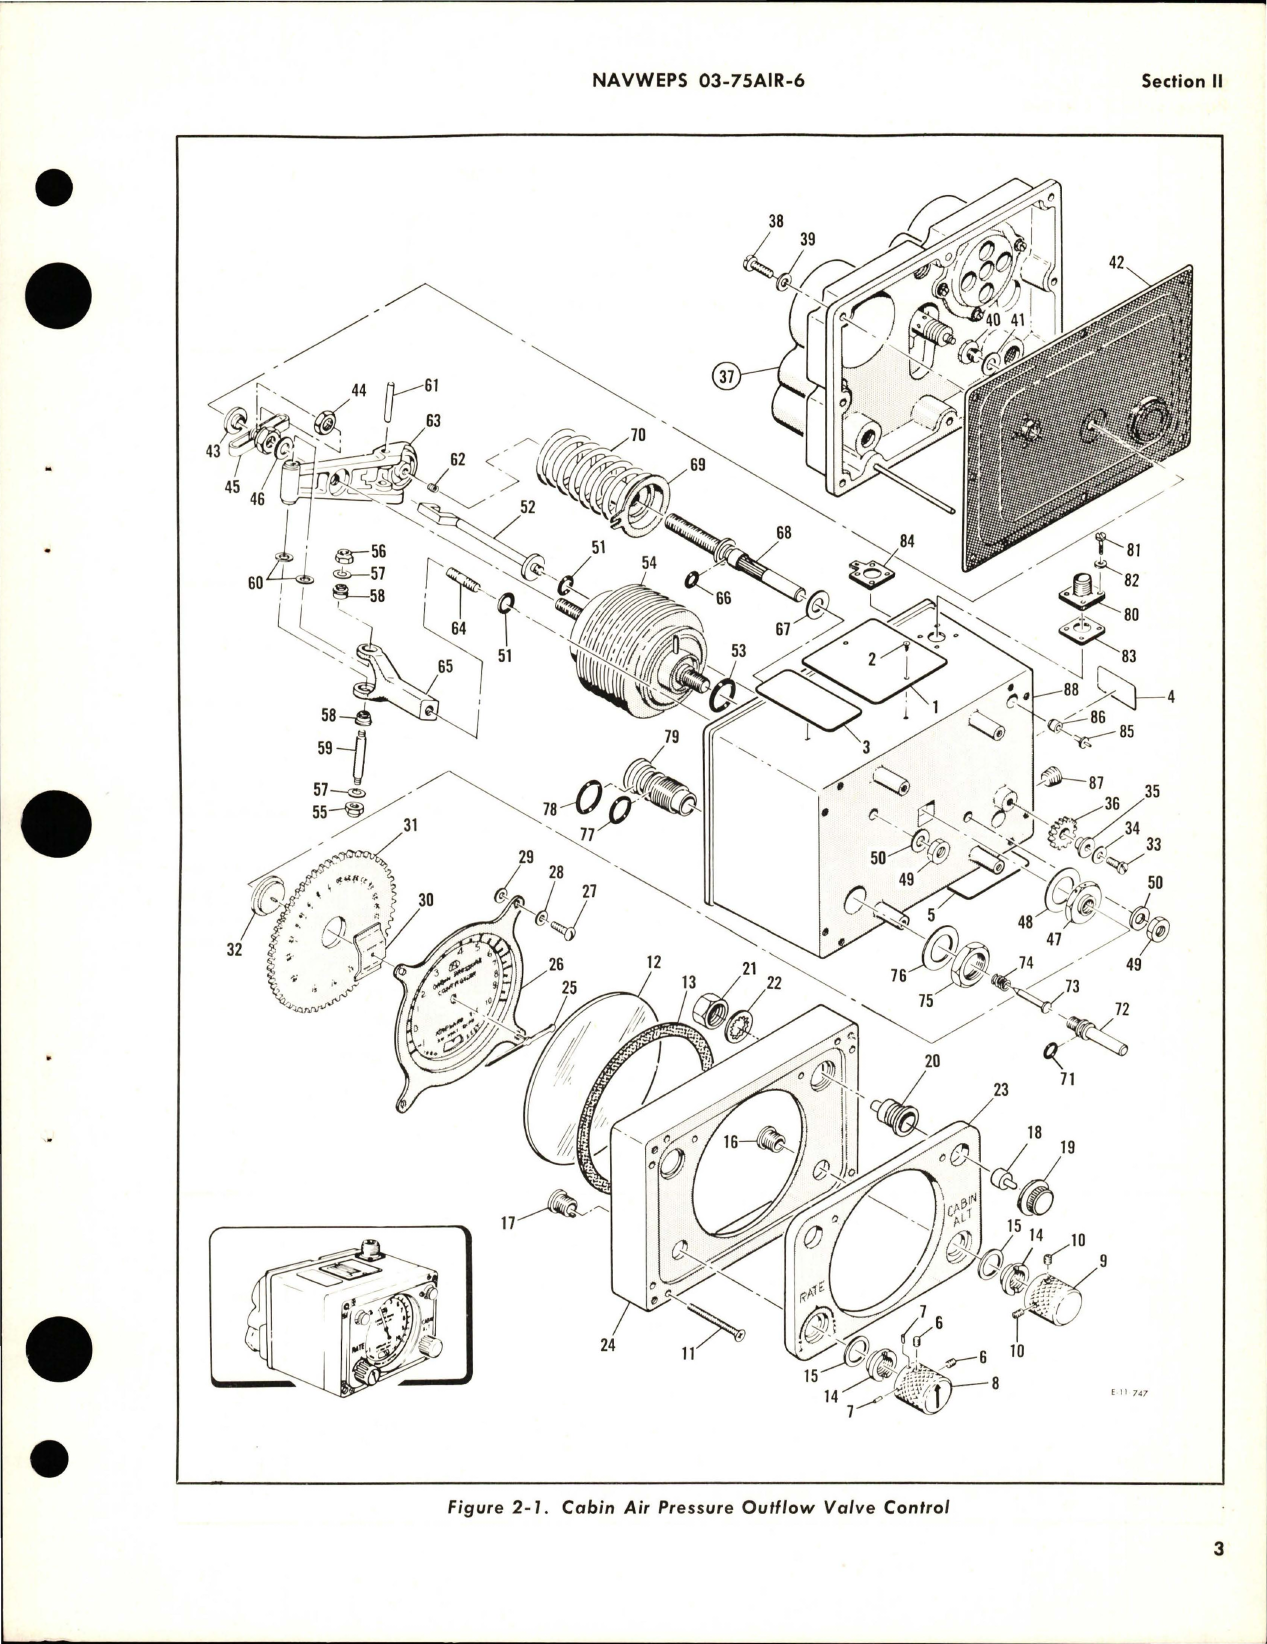 Sample page 7 from AirCorps Library document: Overhaul Instructions for Cabin Air Pressure Outflow Valve Control - Part 102076-3